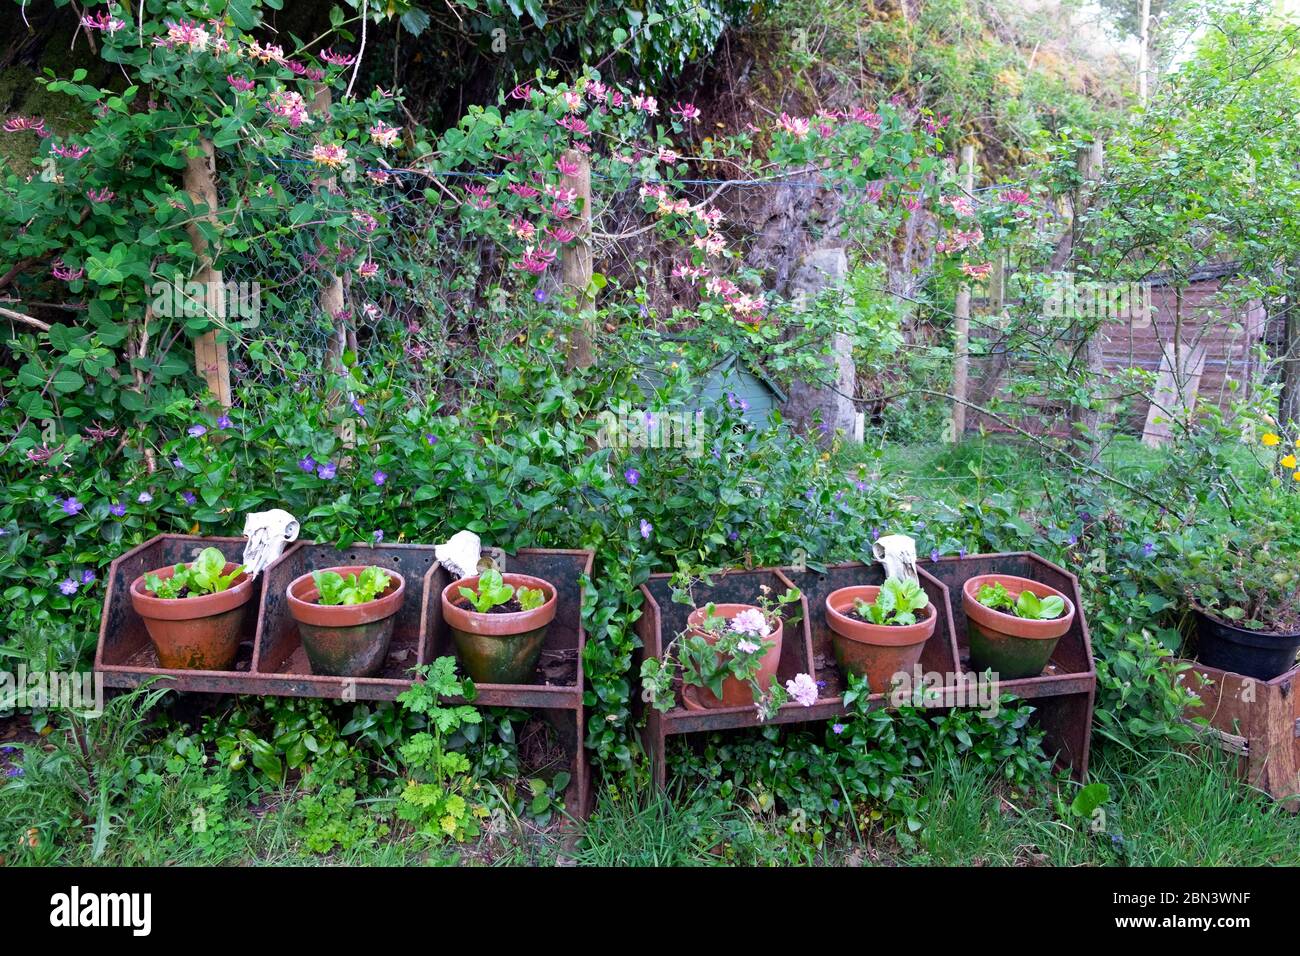 Lettuce plants growing in a row of terra cotta pots on old agricultural stand in a country garden with honeysuckle on fence Wales UK KATHY DEWITT Stock Photo